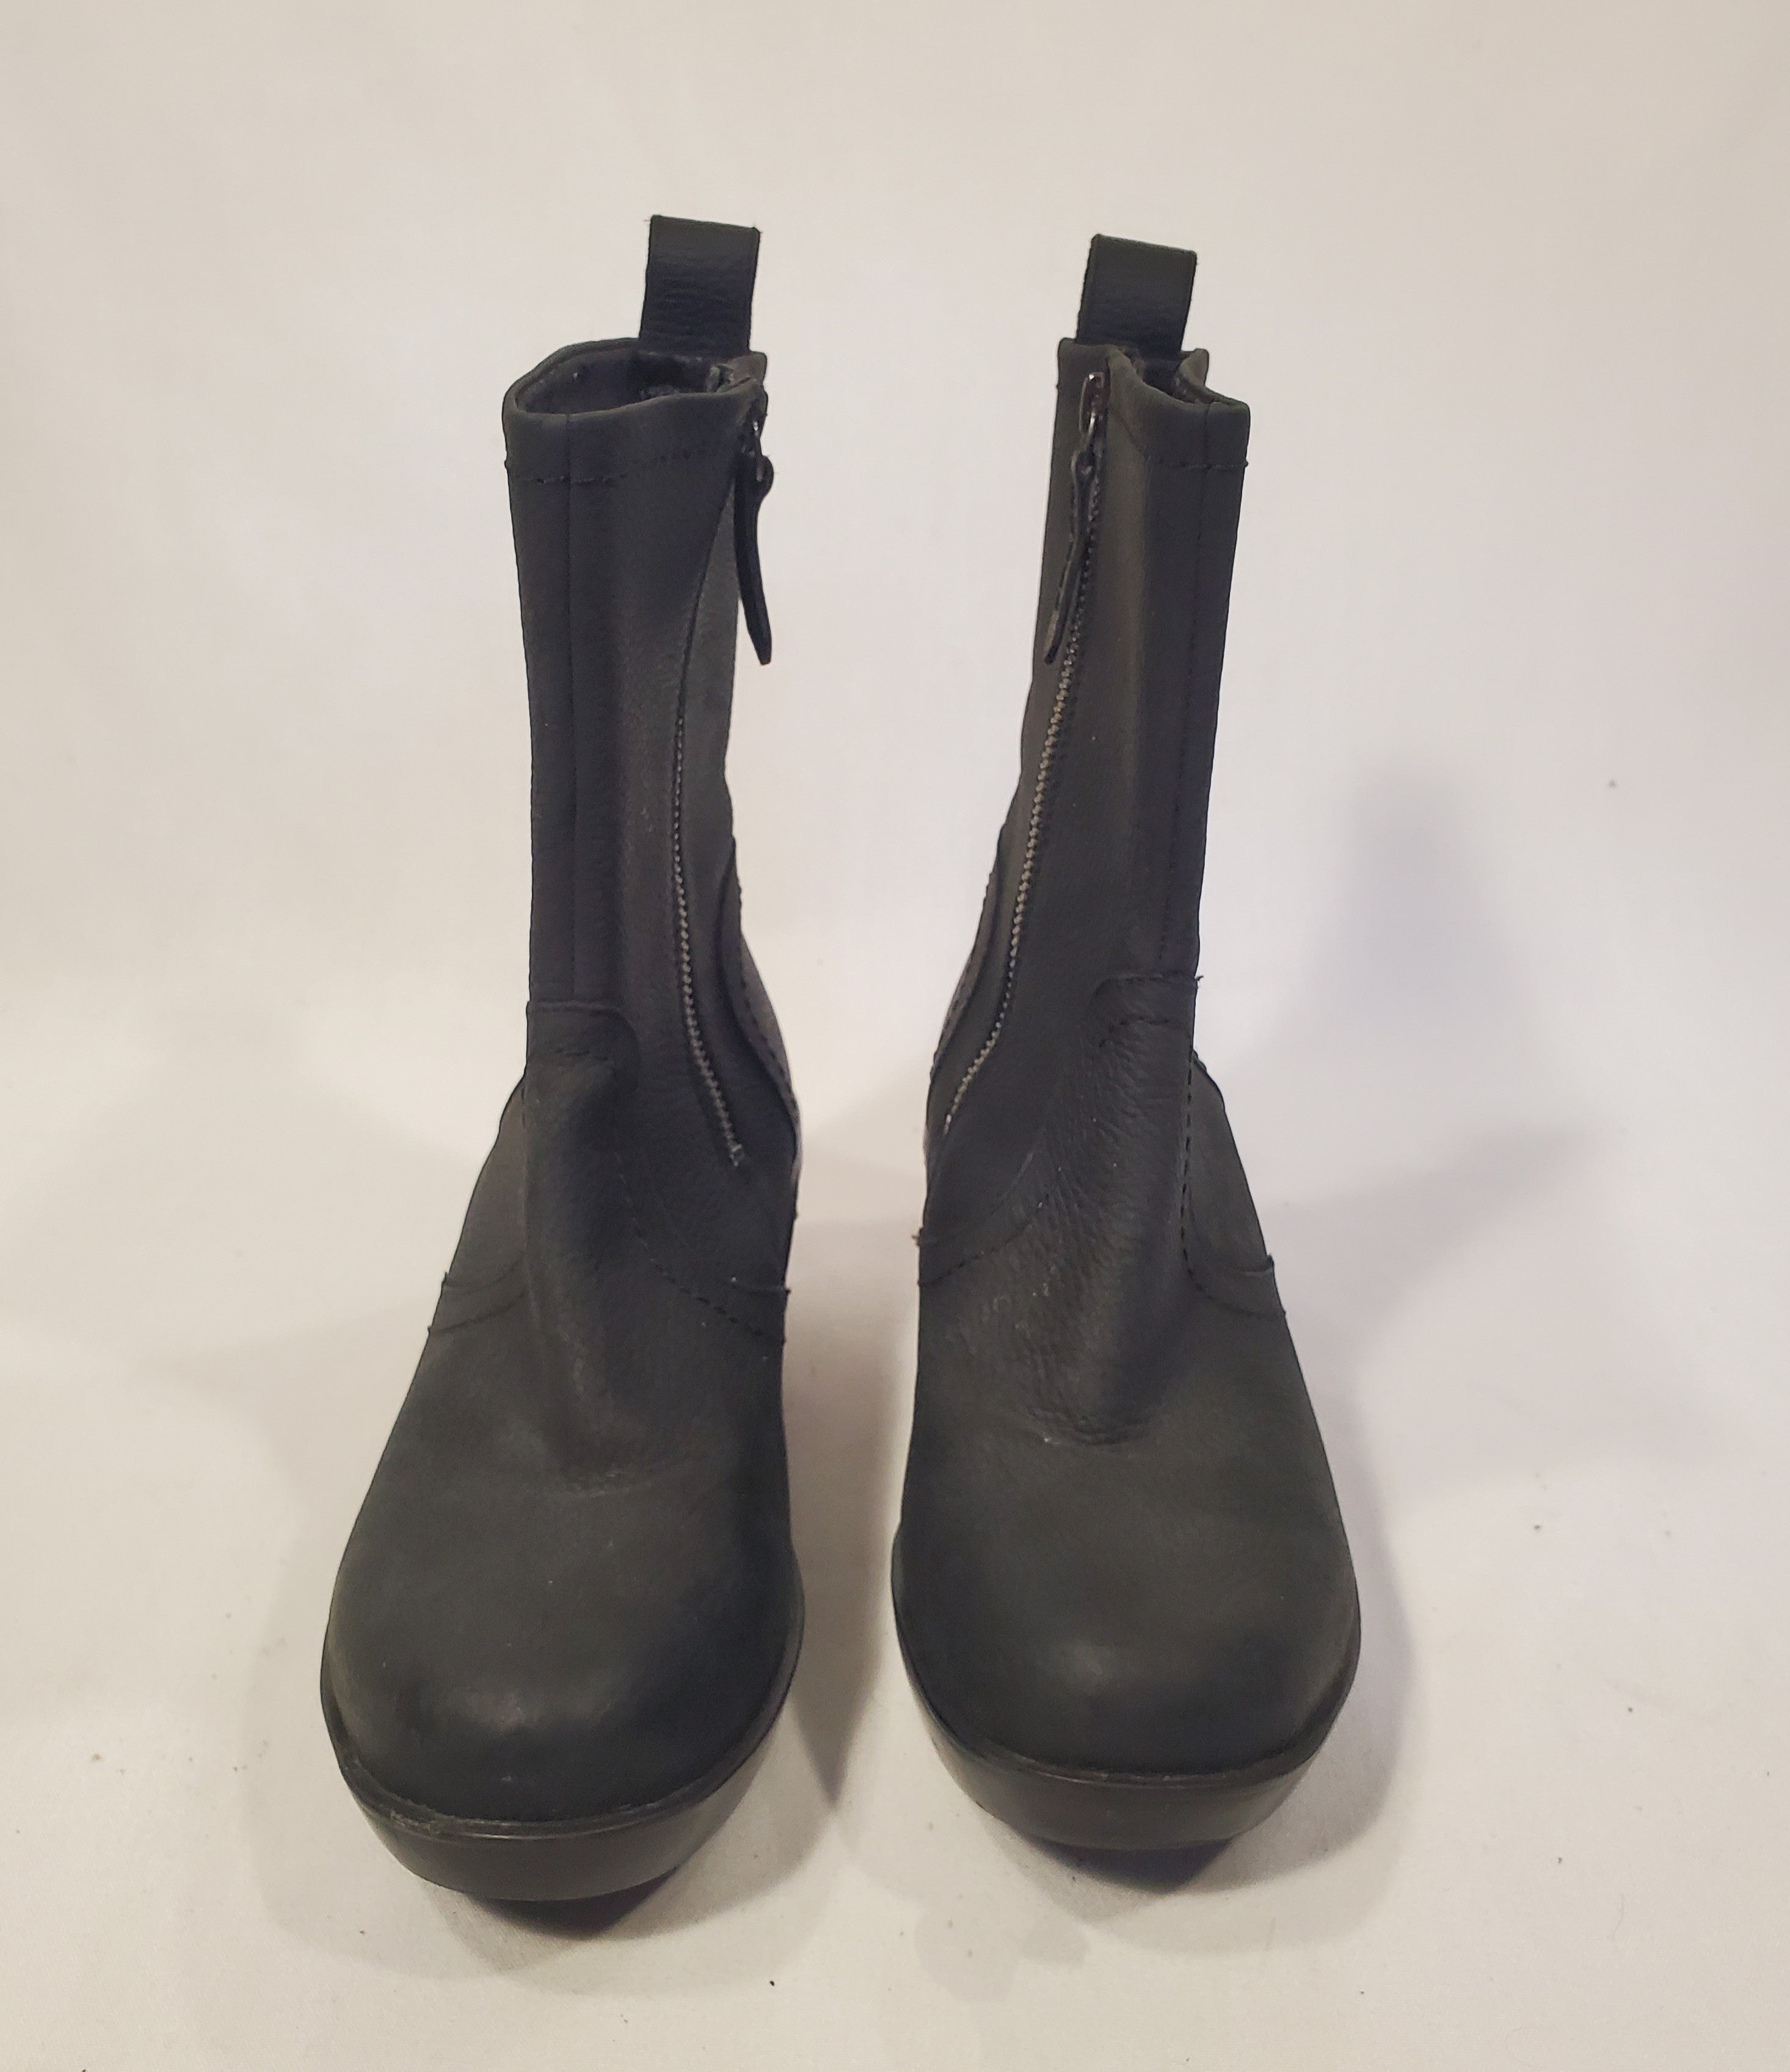 Ariat Brittany Boots - Women's 7